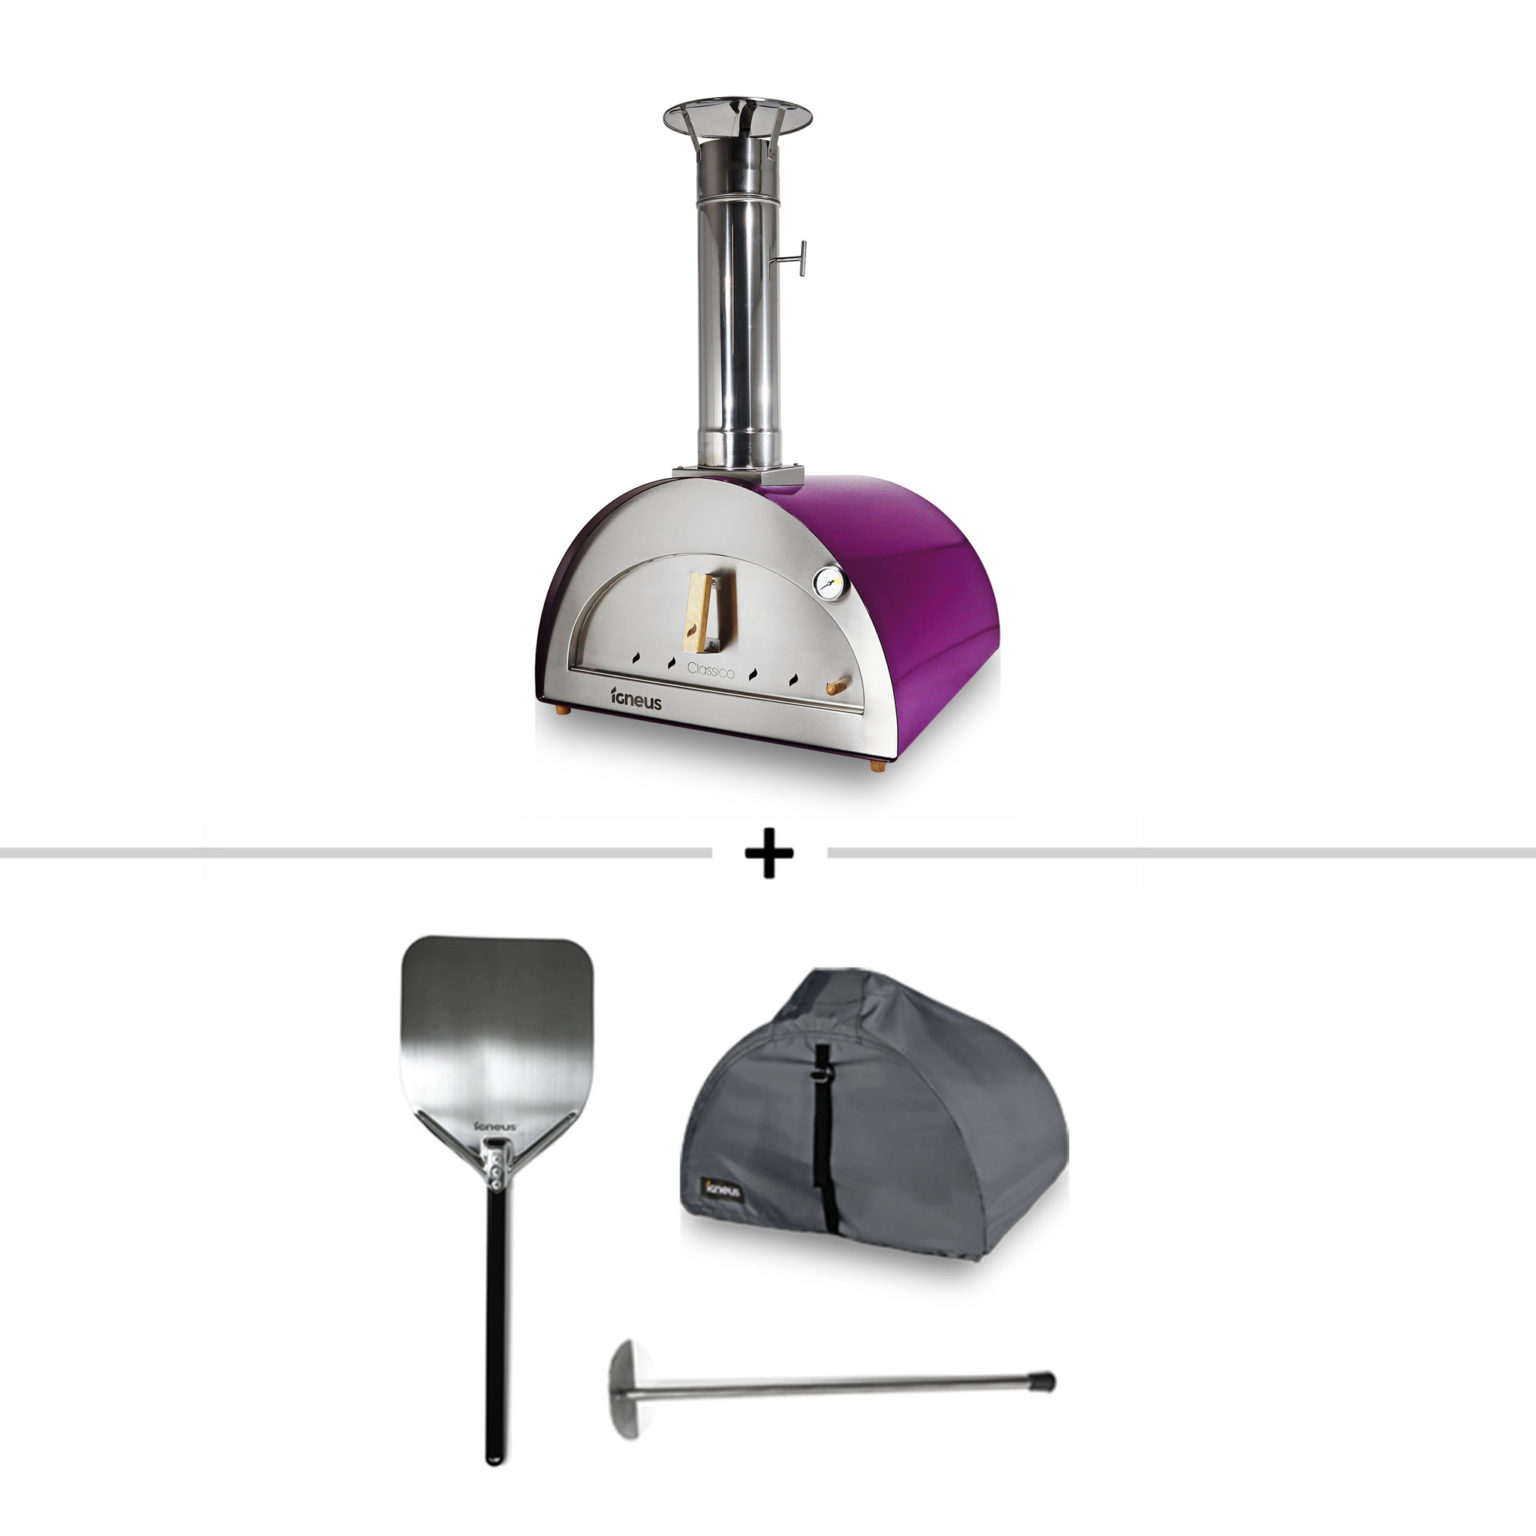 Igneus Classico Starter Bundle wood fired pizza oven